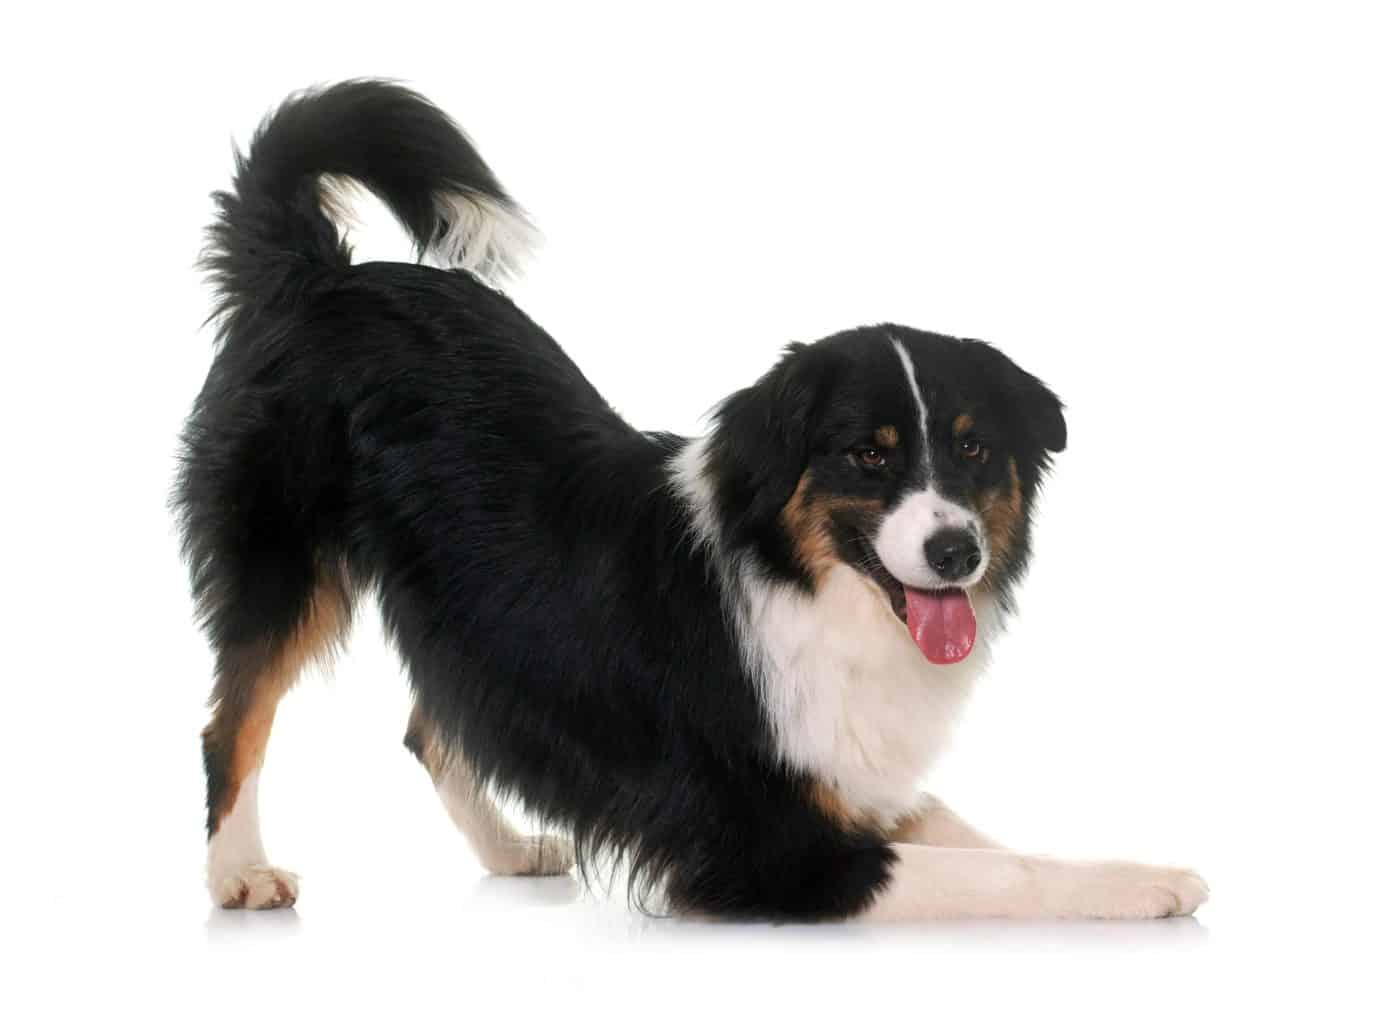 Playful Australian shepherd bows. Our beloved pets are family members. As pet parents, there's a lot we can do to keep our doggies' tails wagging.